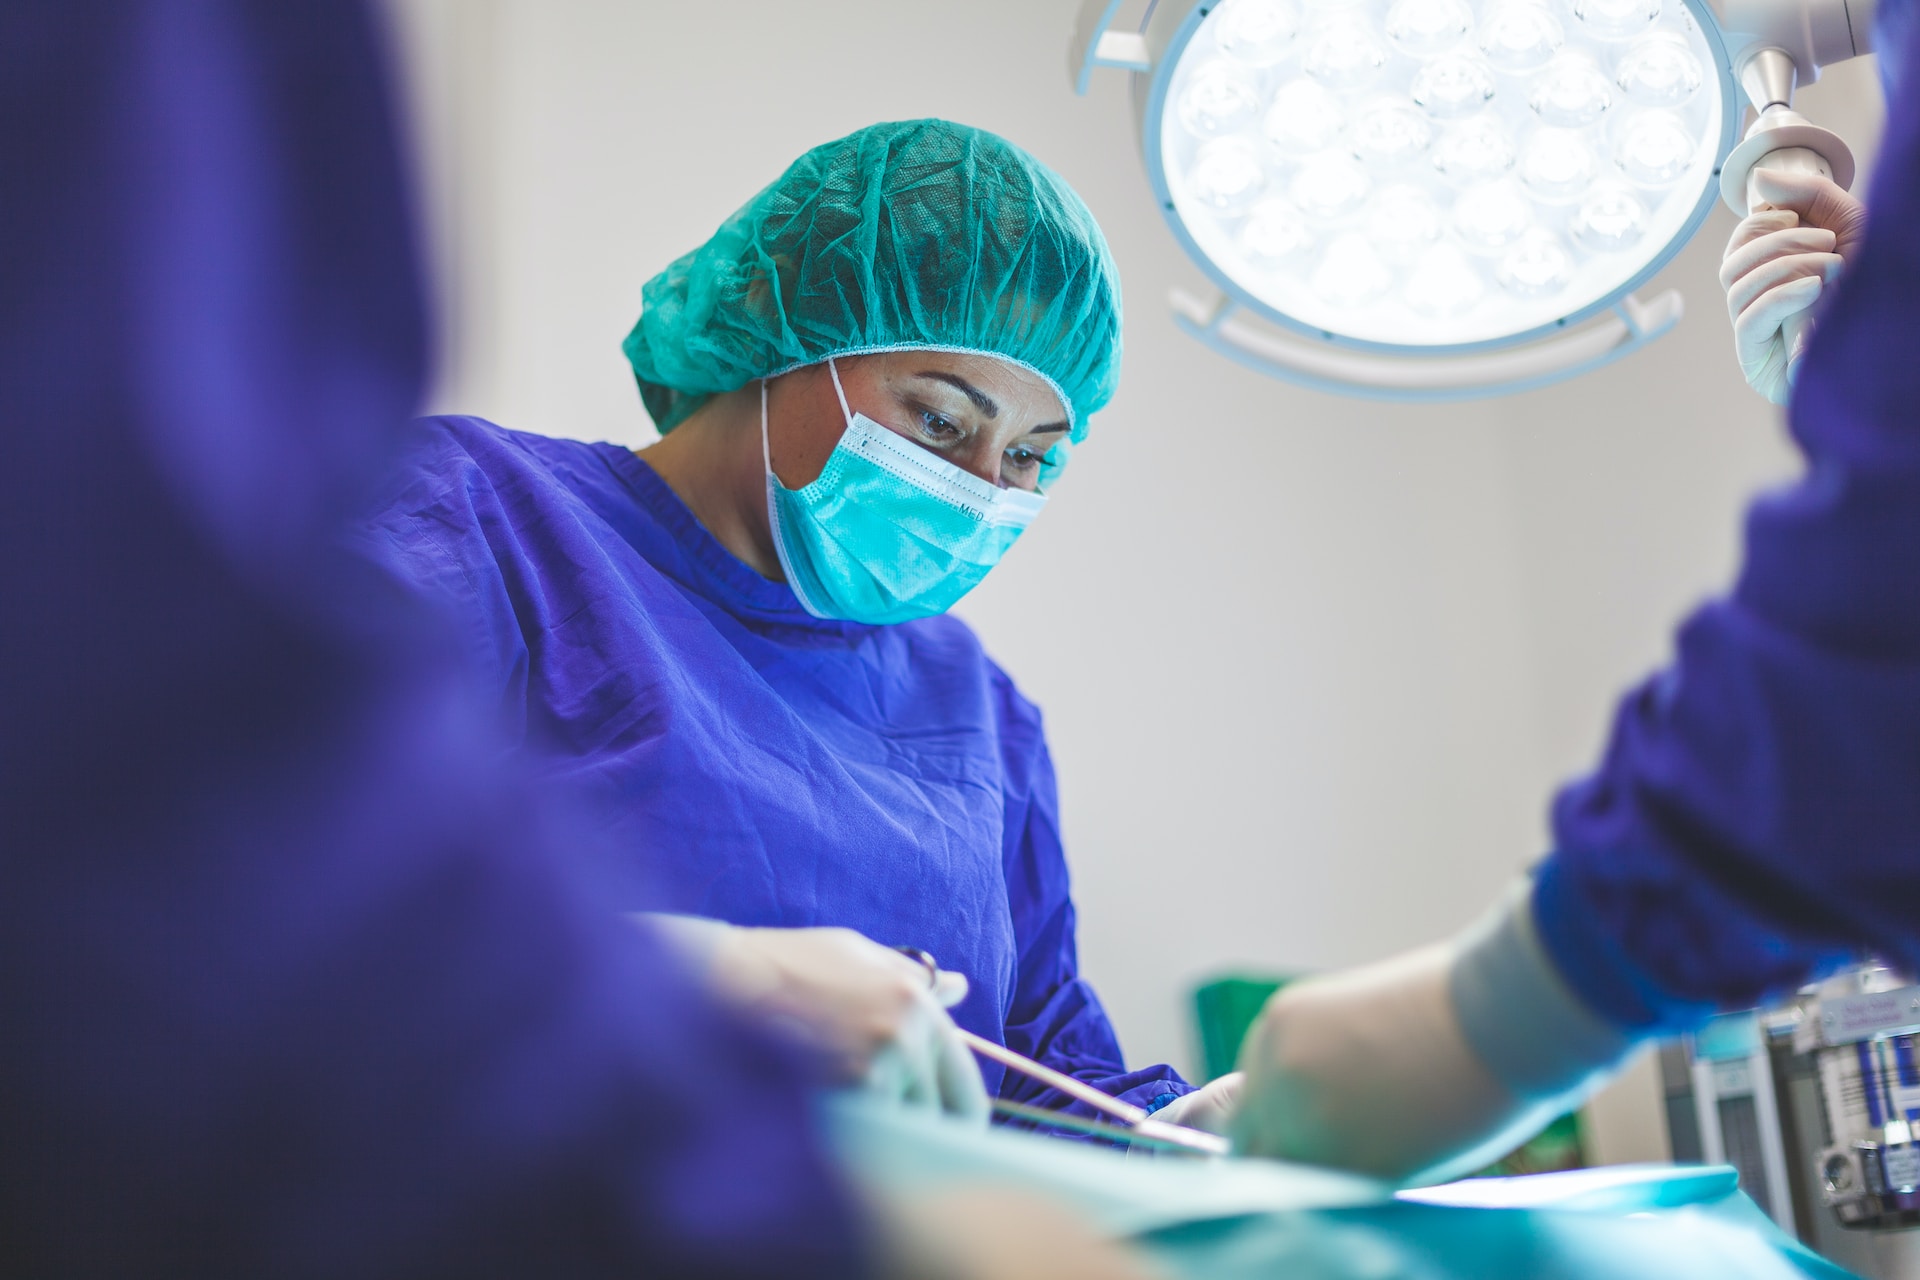 A female doctor in hairnet, face mask and blue scrubs holding forceps while doing an endometriosis surgery